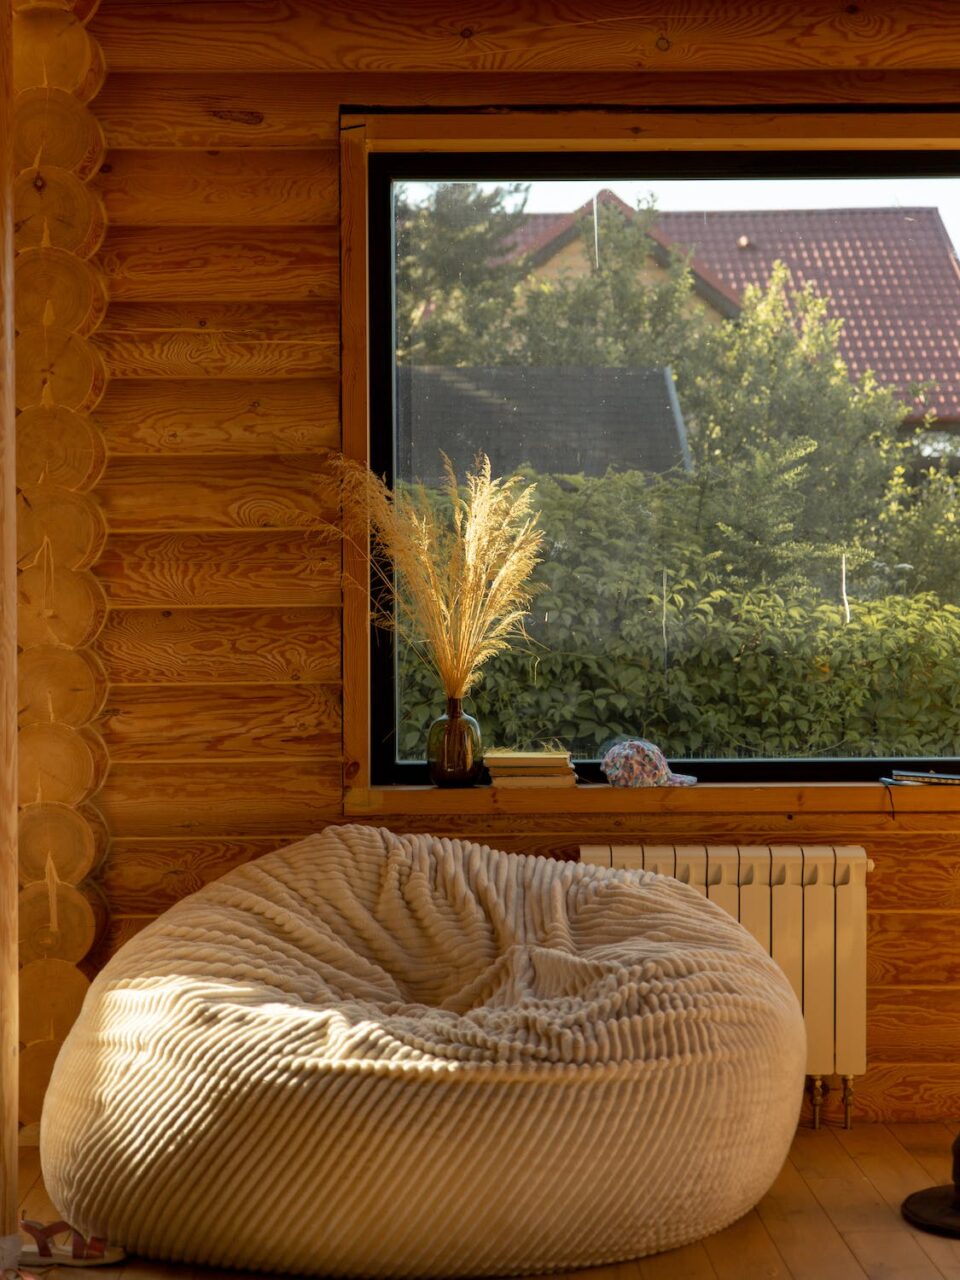 inside the garden room, a window and beanbag